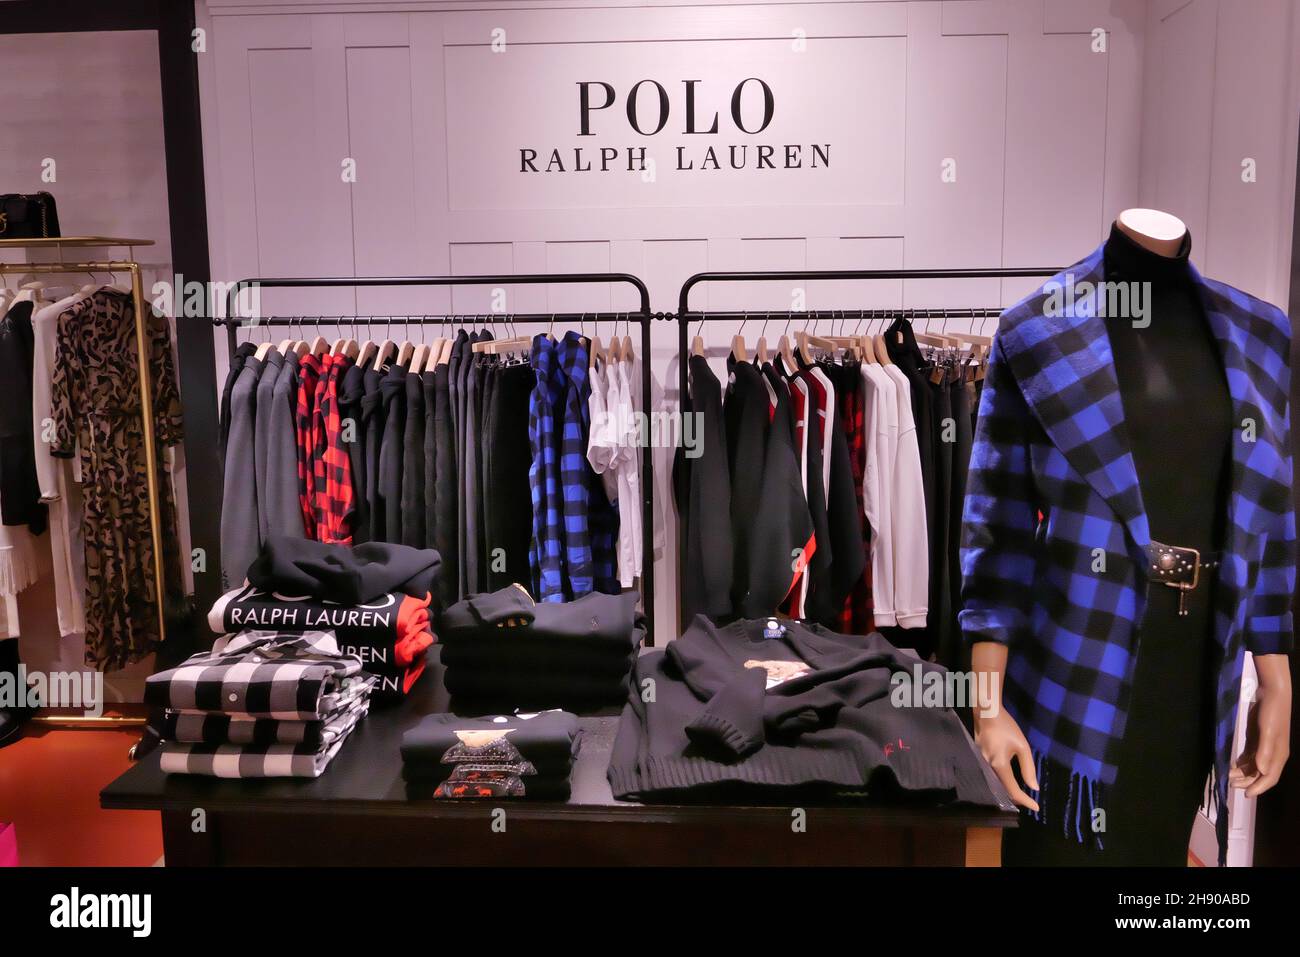 POLO RALPH LAUREN CLOTHING ON DISPLAY INSIDE THE FASHION STORE Stock Photo  - Alamy